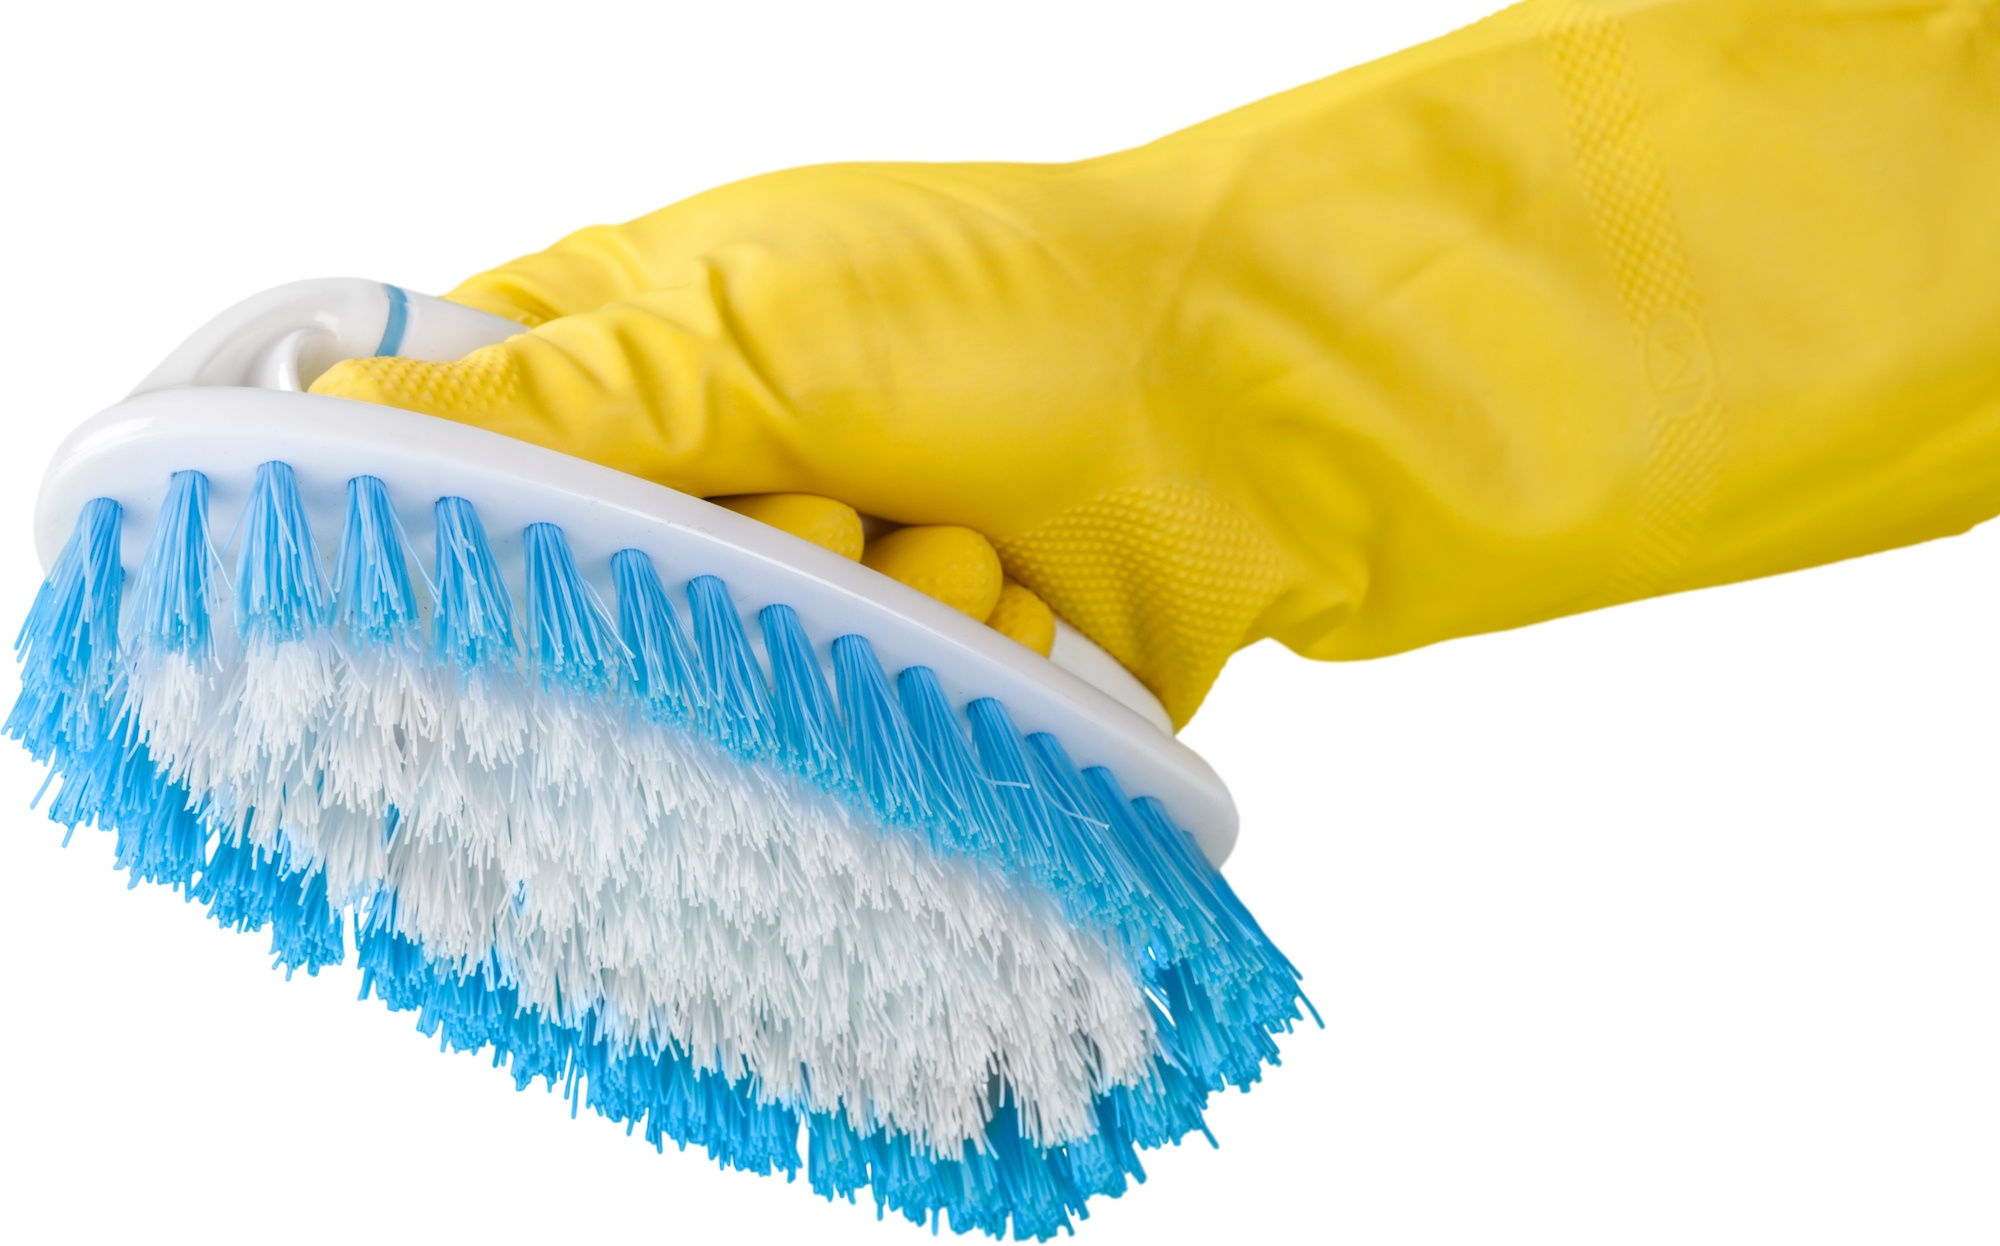 Hand in a yellow cleaning glove holds a scrub brush.